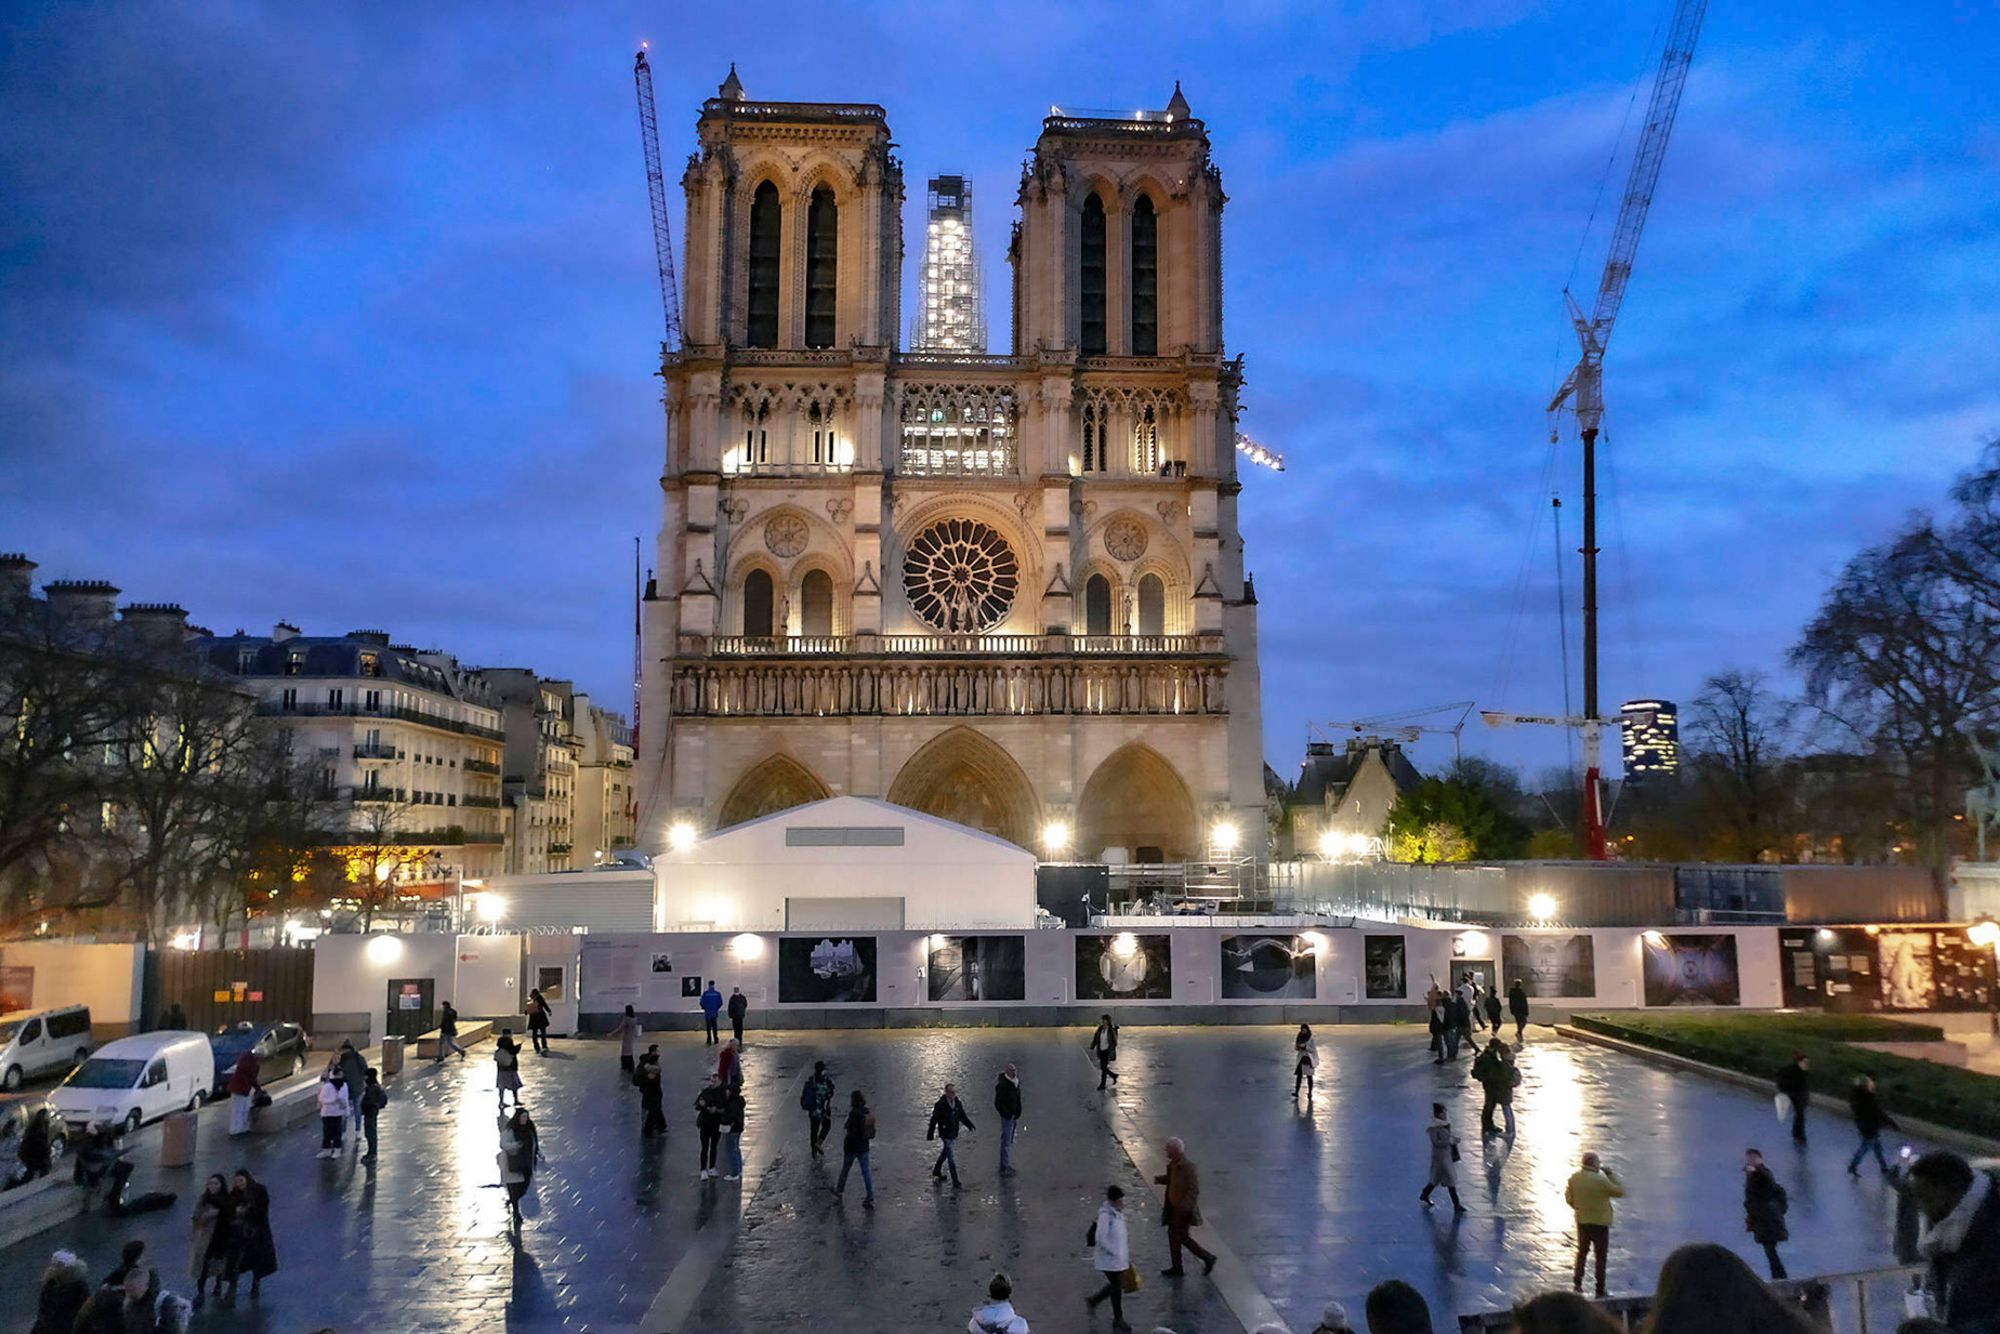 The new rooster is added to the top of Notre Dame cathedral in Paris on December 16, as rebuilding continues after a catastrophic fire in 2019. While the spire is still encased in scaffolding at the moment, the 860-year-old building will reopen in 2024.